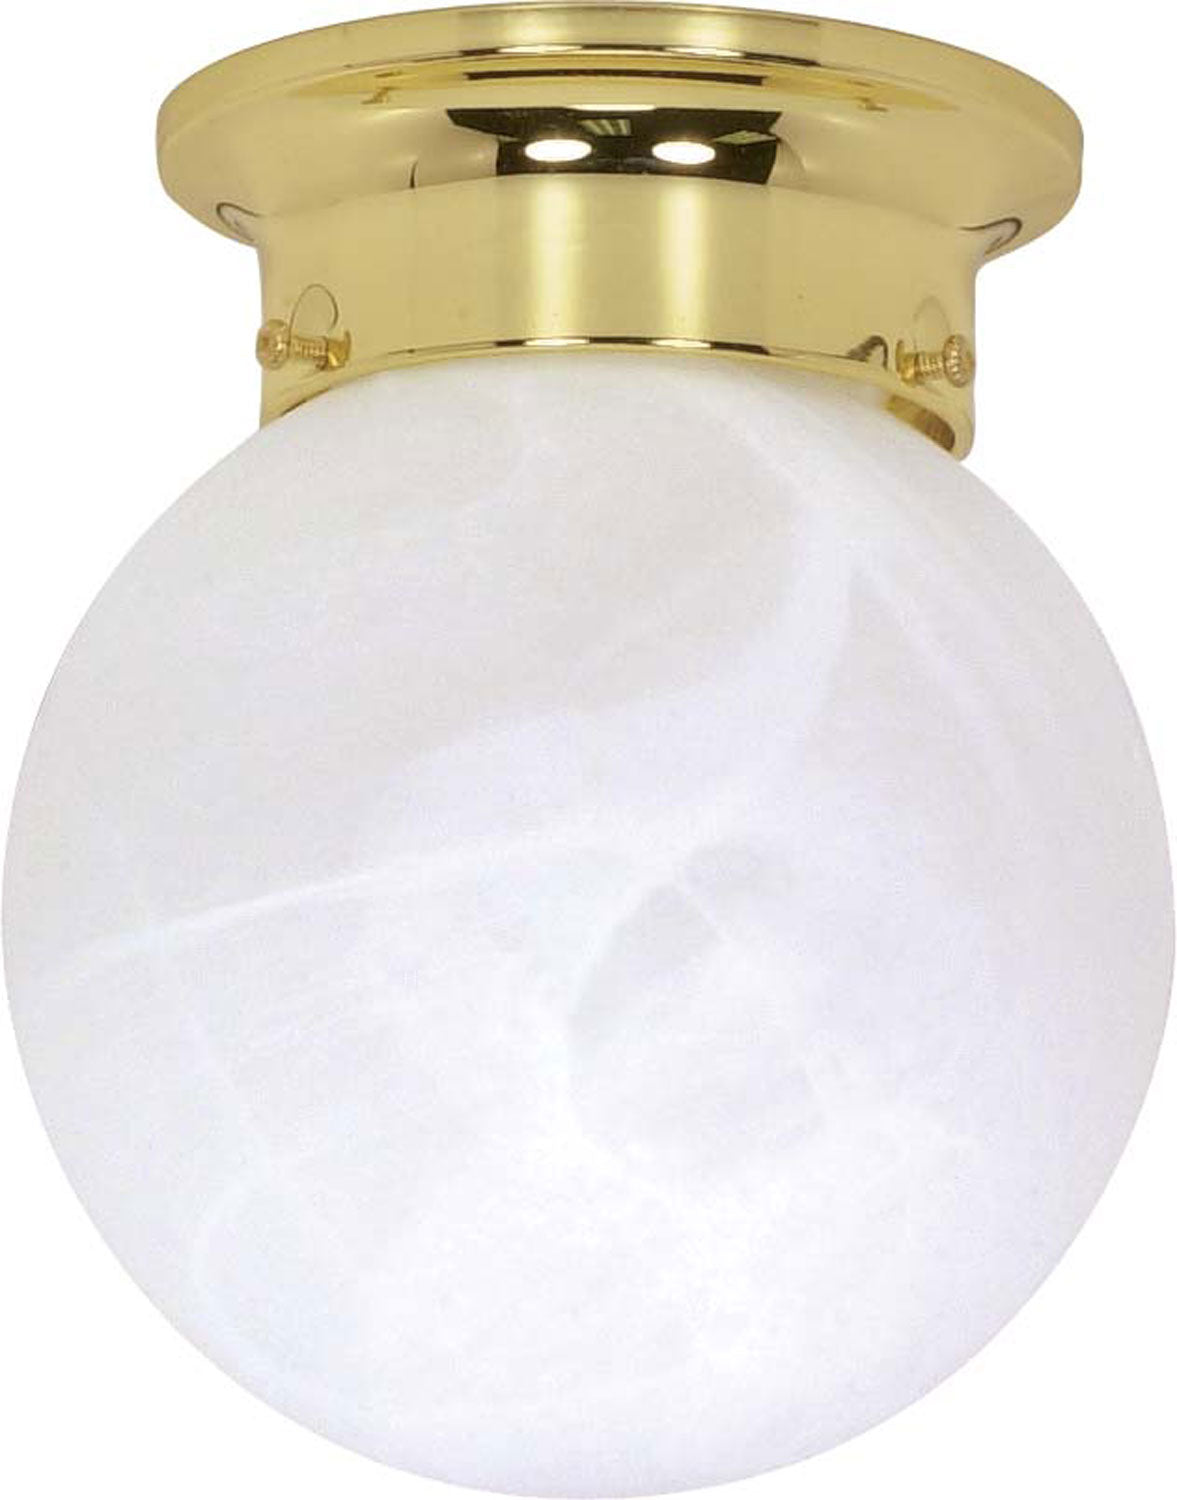 Nuvo 6 Alabaster Ball 60-255 Ceiling Light - Polished Brass